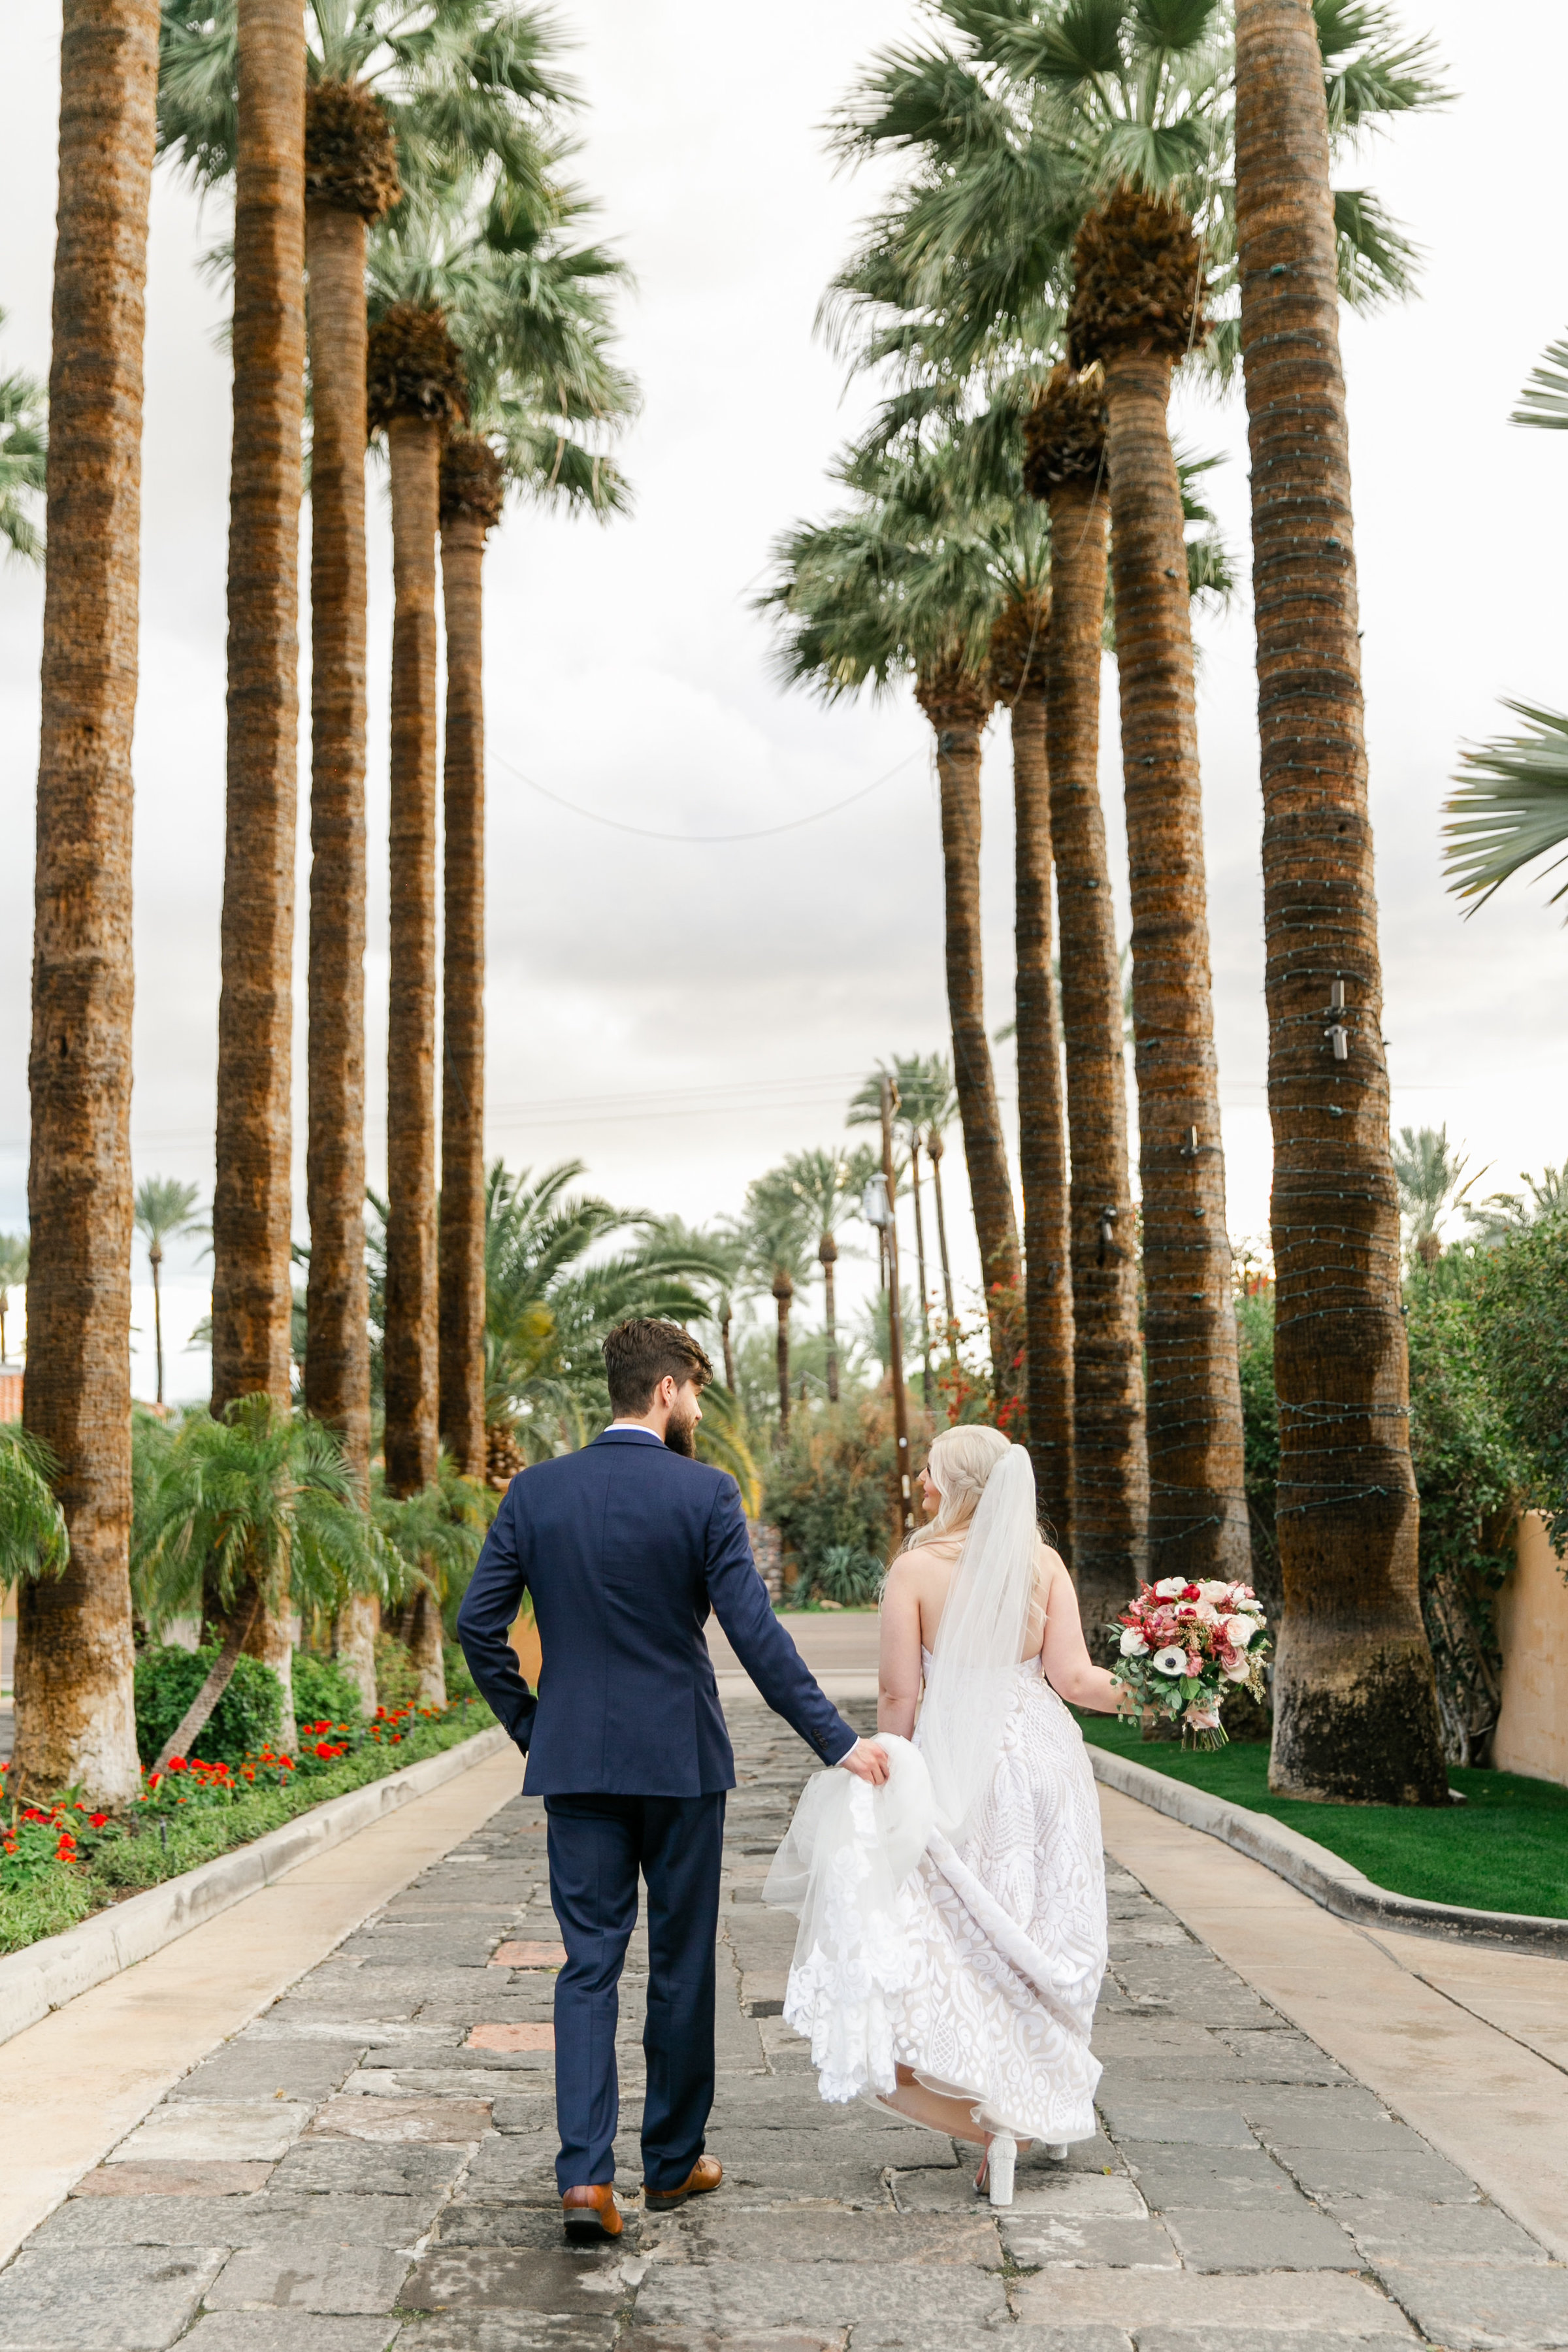 Karlie Colleen Photography - The Royal Palms Wedding - Some Like It Classic - Alex & Sam-570